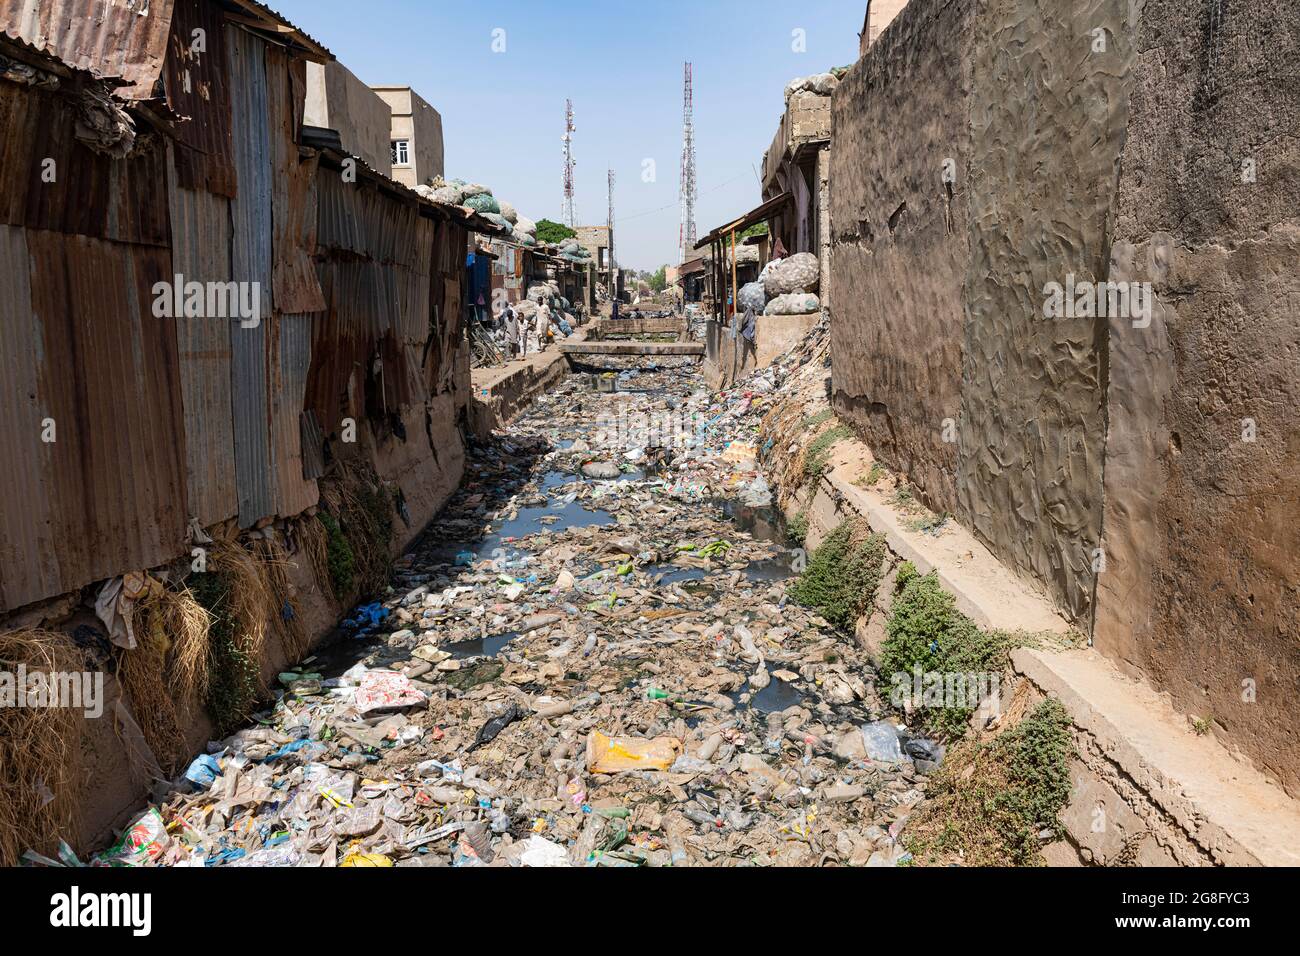 Totally dirty water channel, pollution, Kano, Kano state, Nigeria, West Africa, Africa Stock Photo